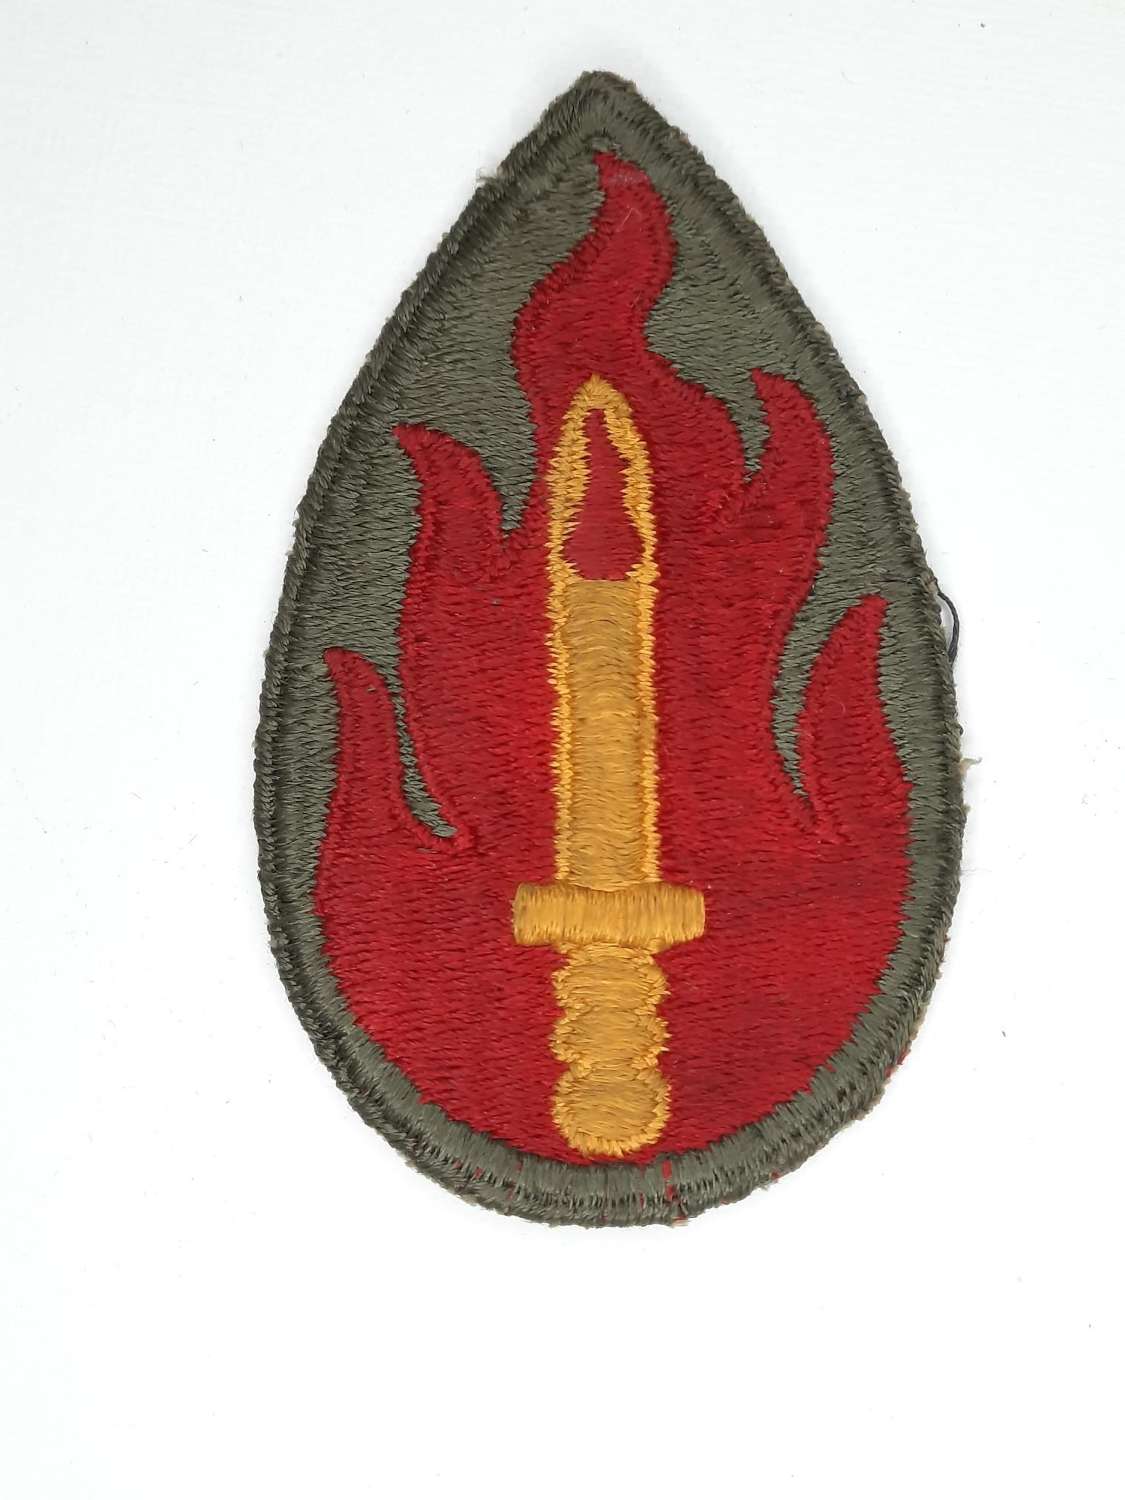 WW2 Us 63rd Infantry Division Patch